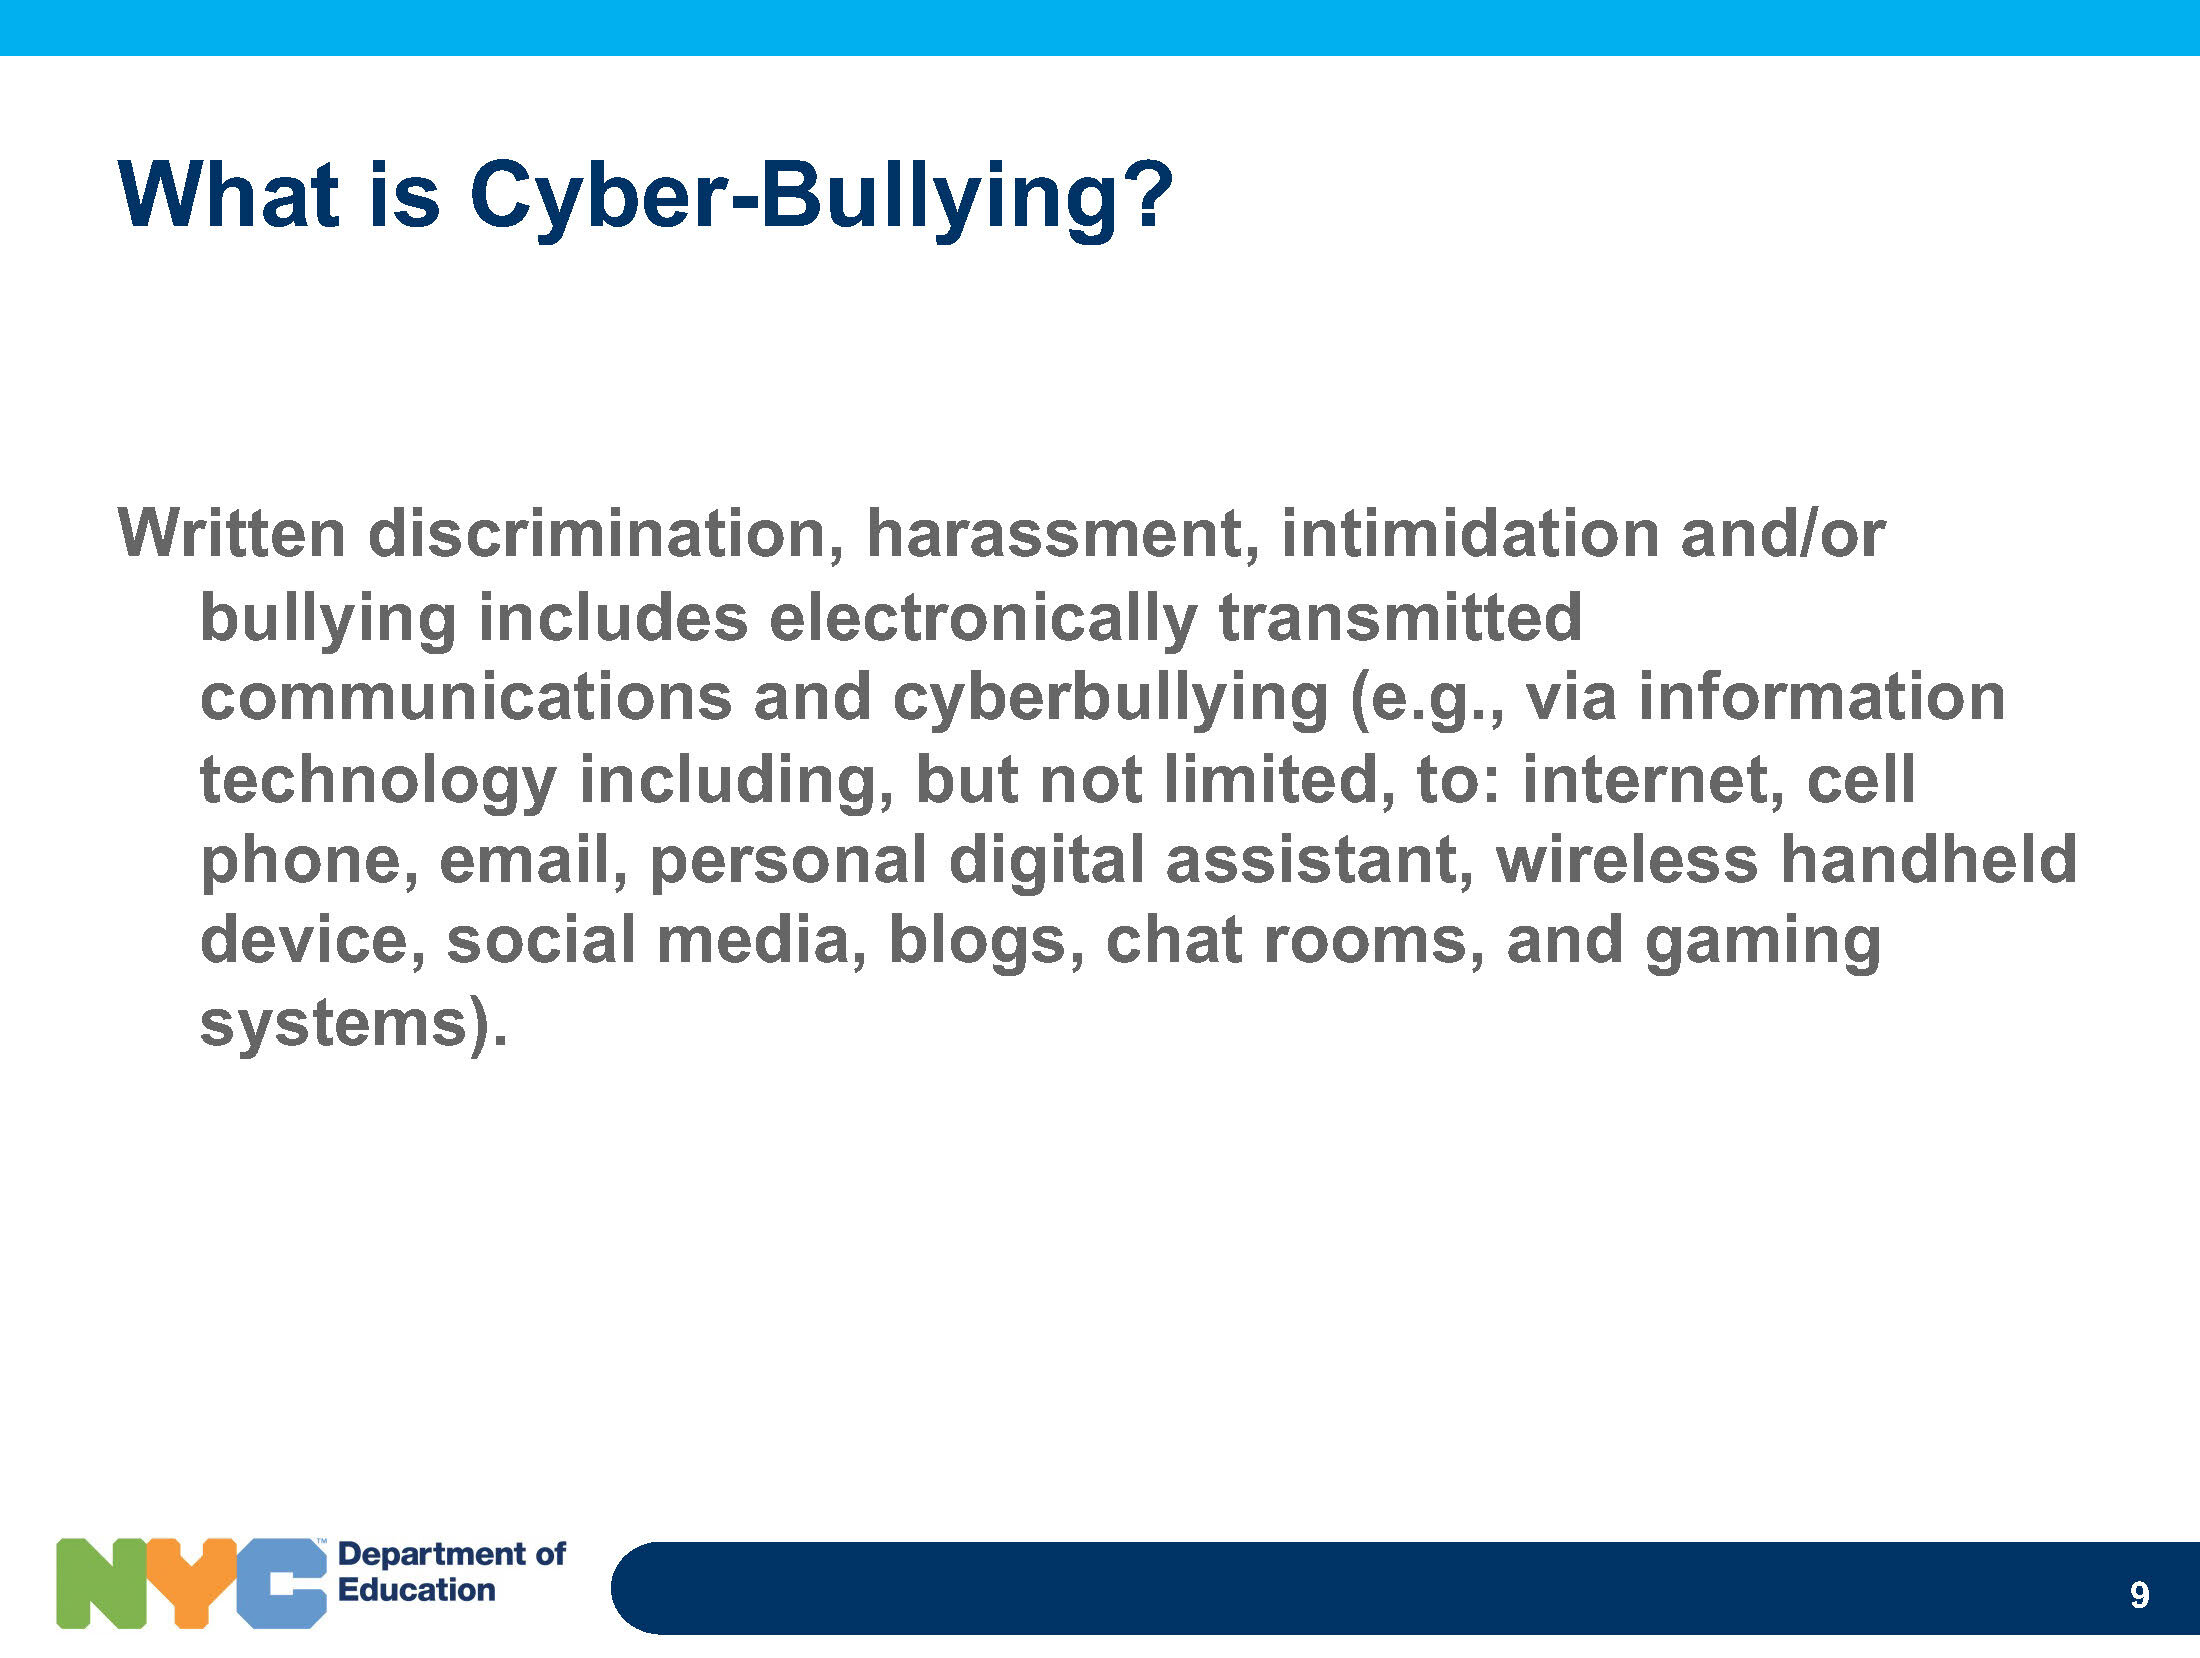 face-bullying-and-cyberbullying-presentation-for-parents_Page_09.jpg